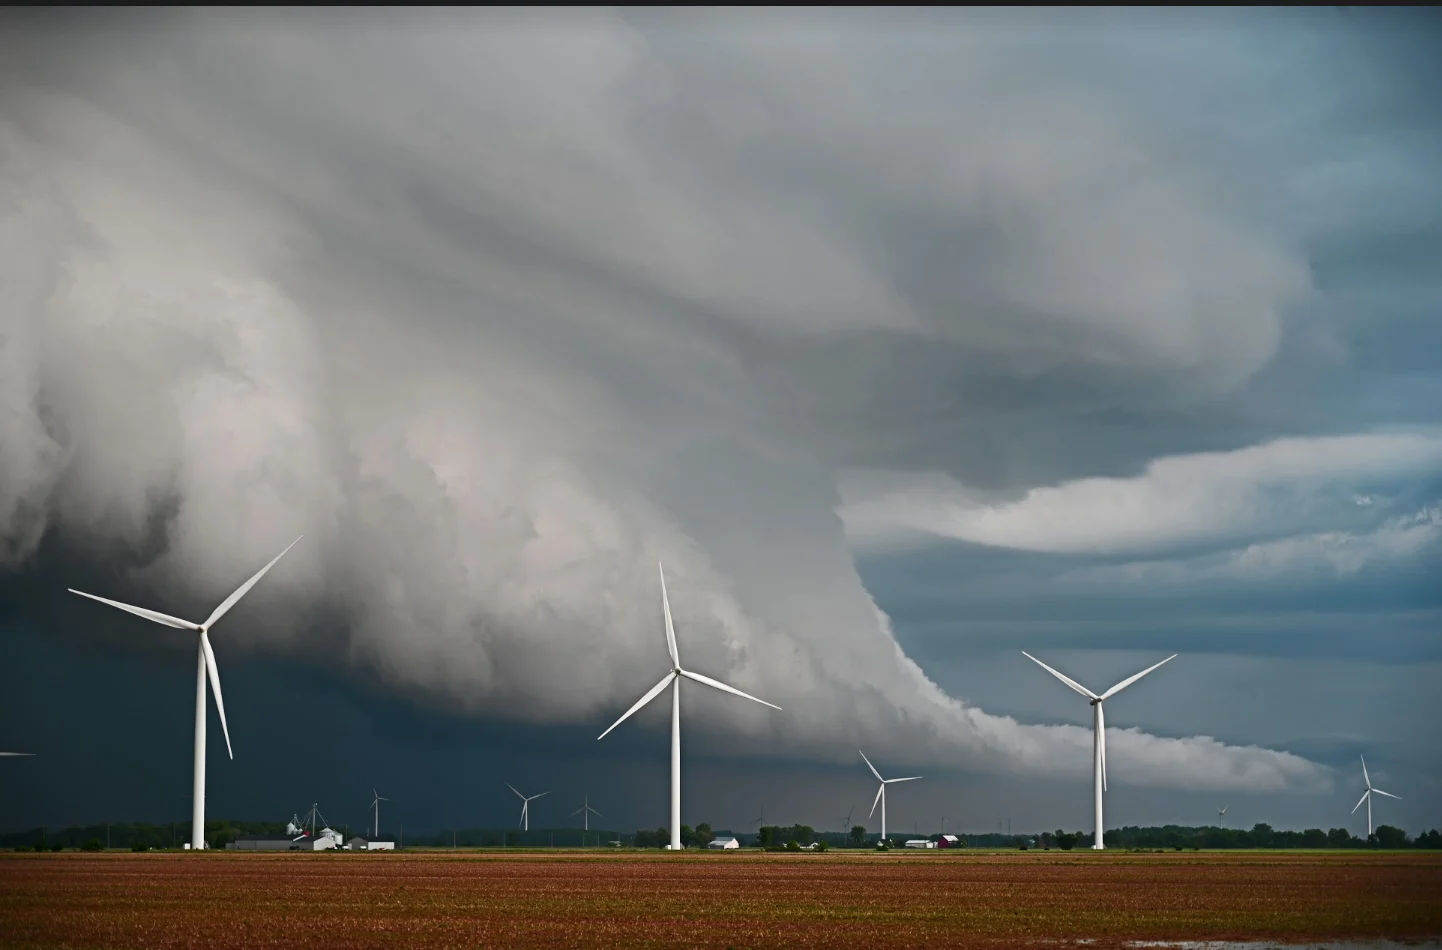 BY MARK ROBSON: Ontario shelf cloud, July 19, 2020 (image 2)